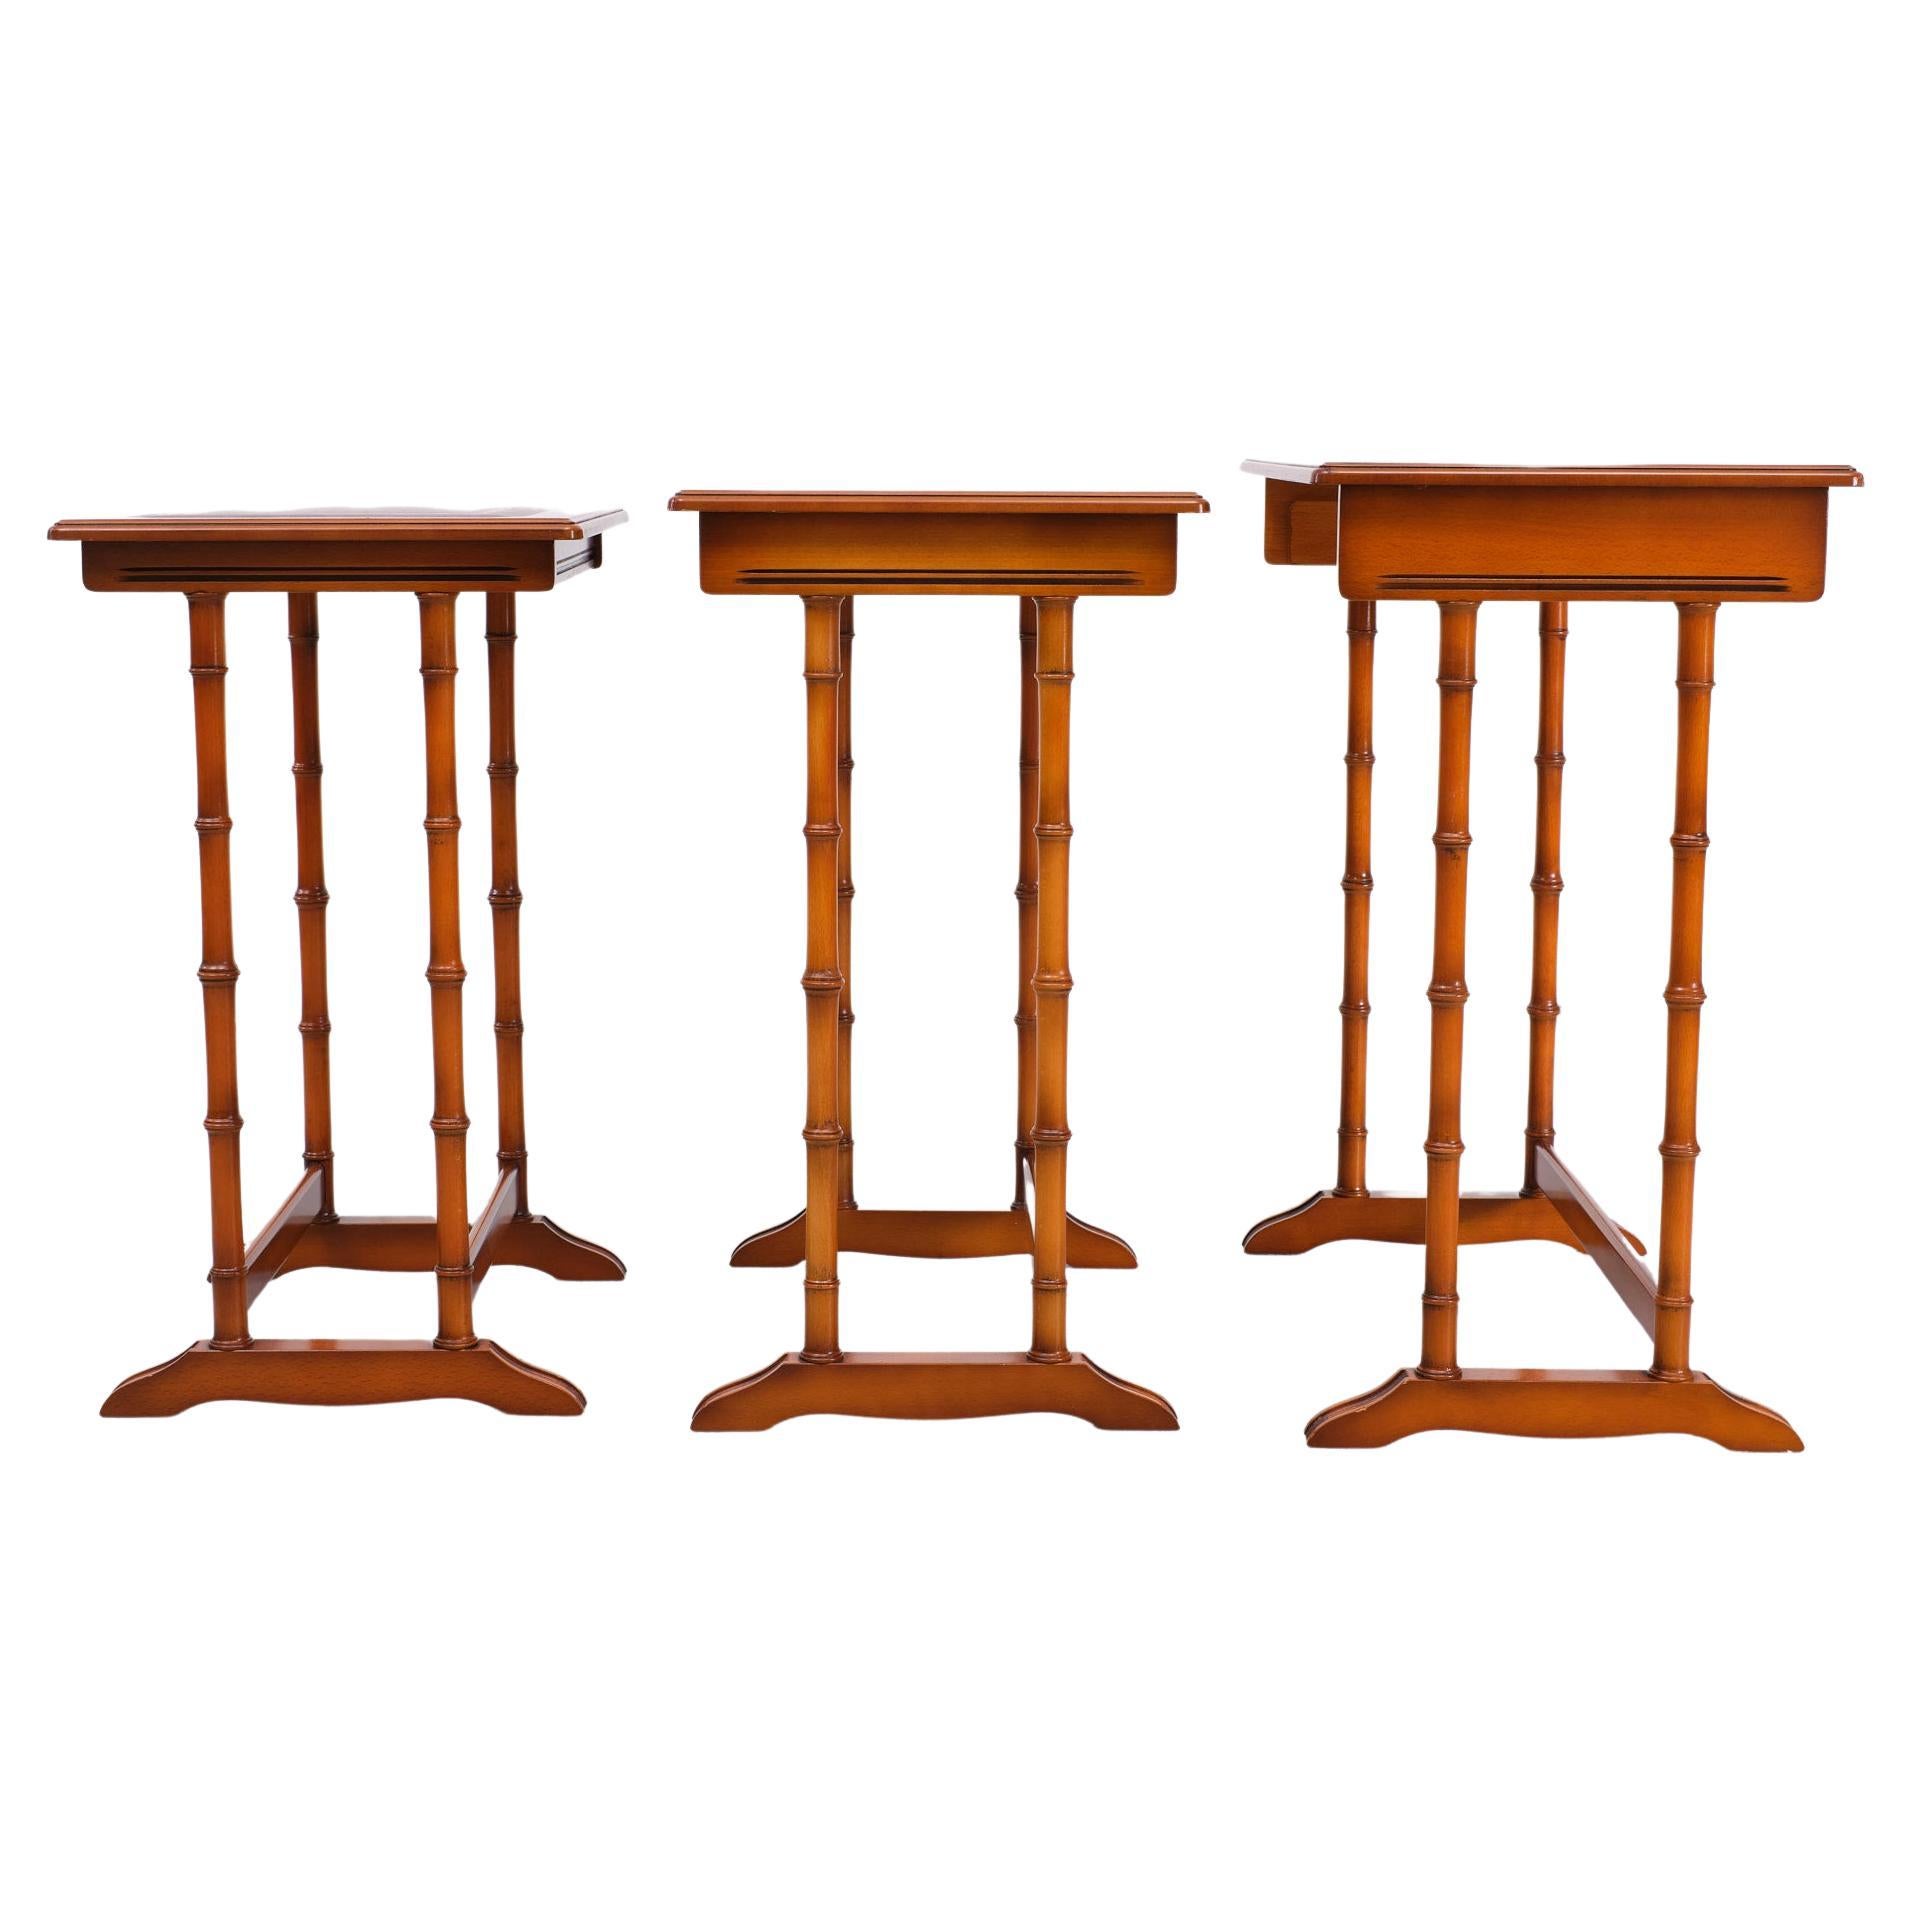   Exclusive English furniture  Cherry wood nesting tables  1970s  In Good Condition For Sale In Den Haag, NL